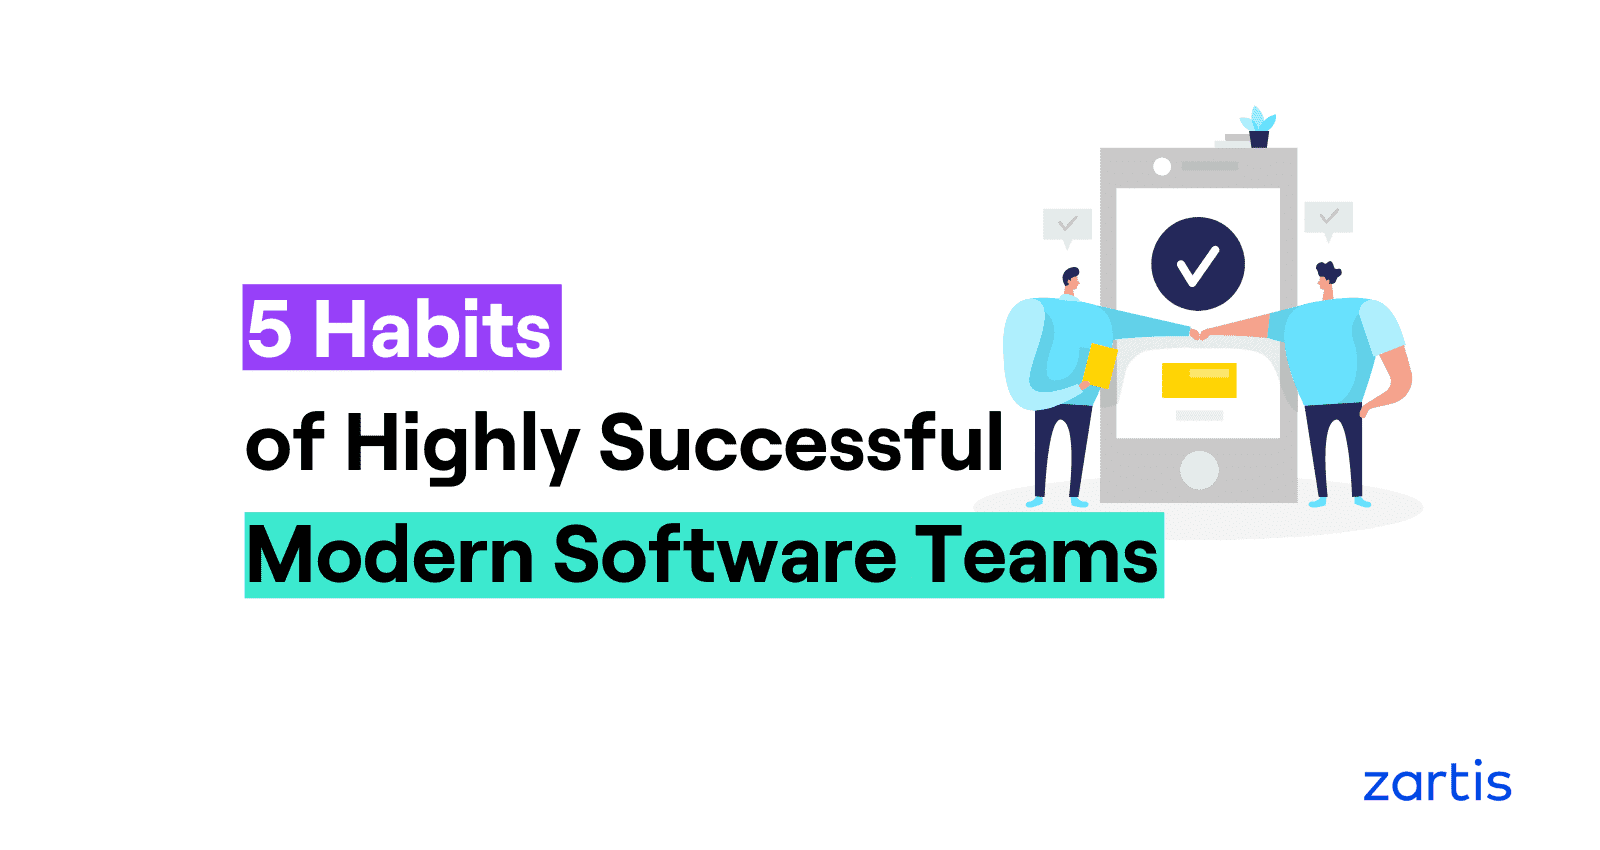 5 habits of highly successful modern software teams